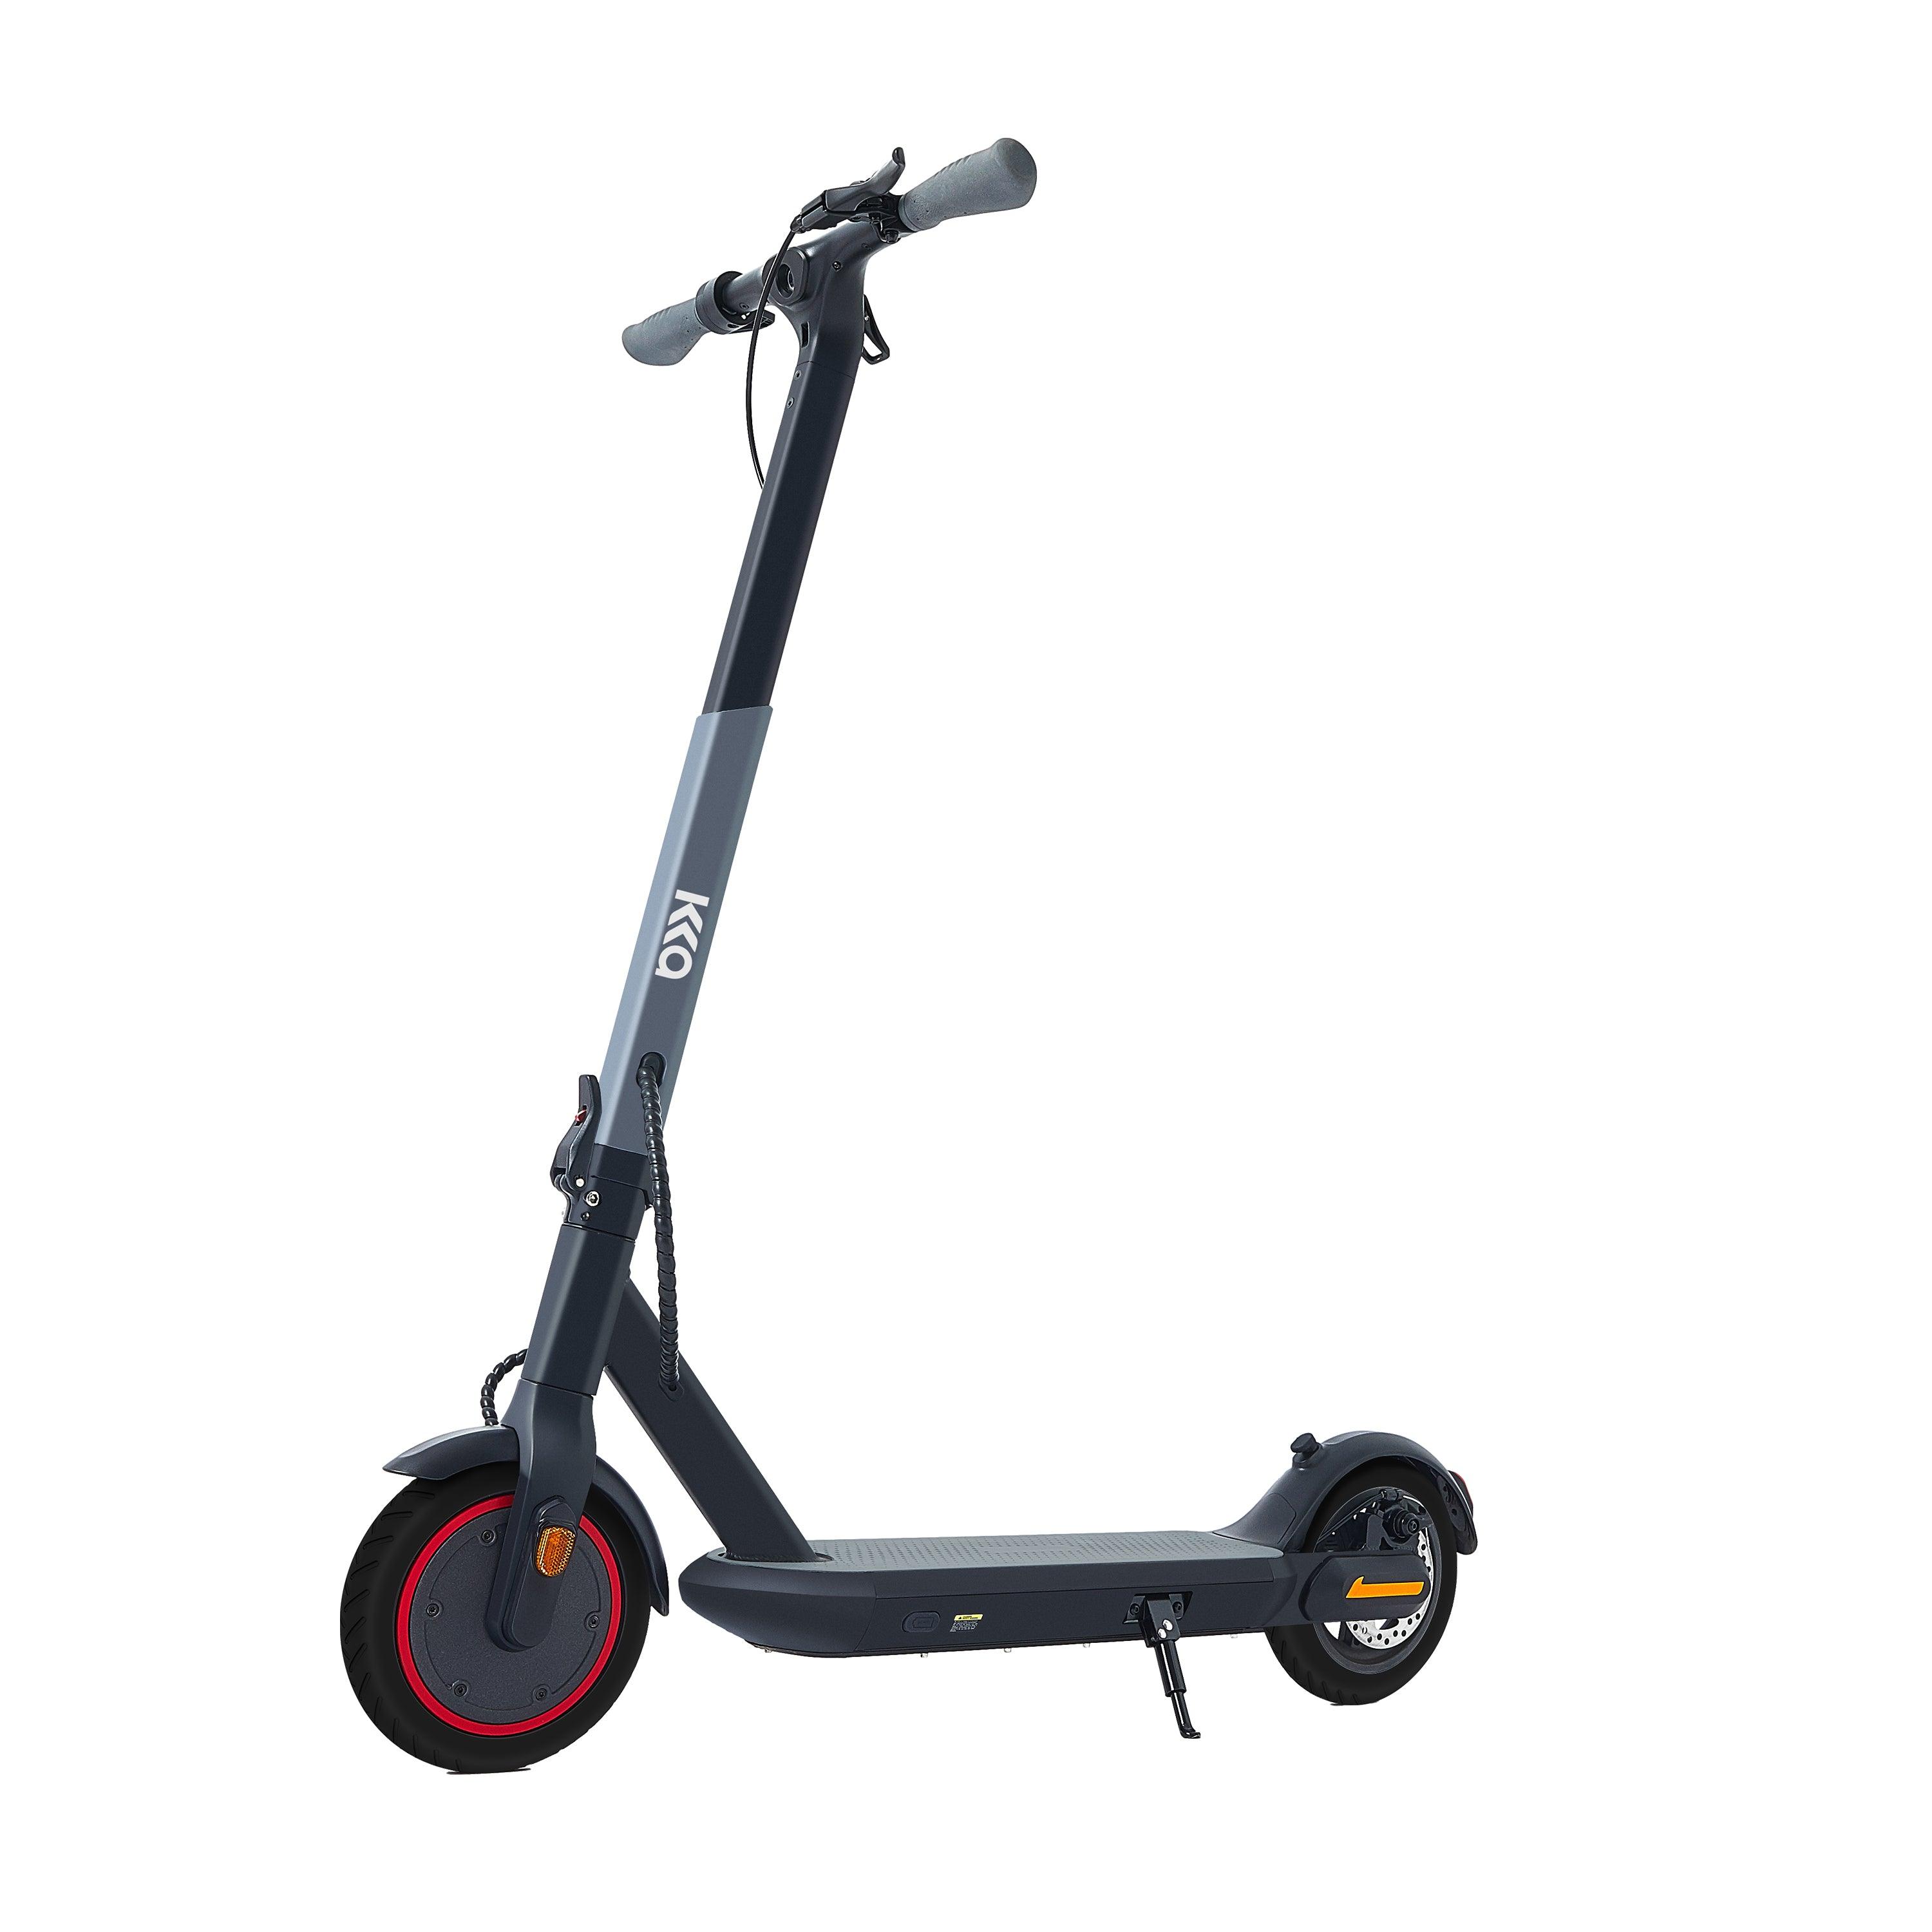 36V Freddo X1 E-Scooter. 350W motor, 16 mph, 8.5 inch tires, lightweight and foldable - DTI Direct USA